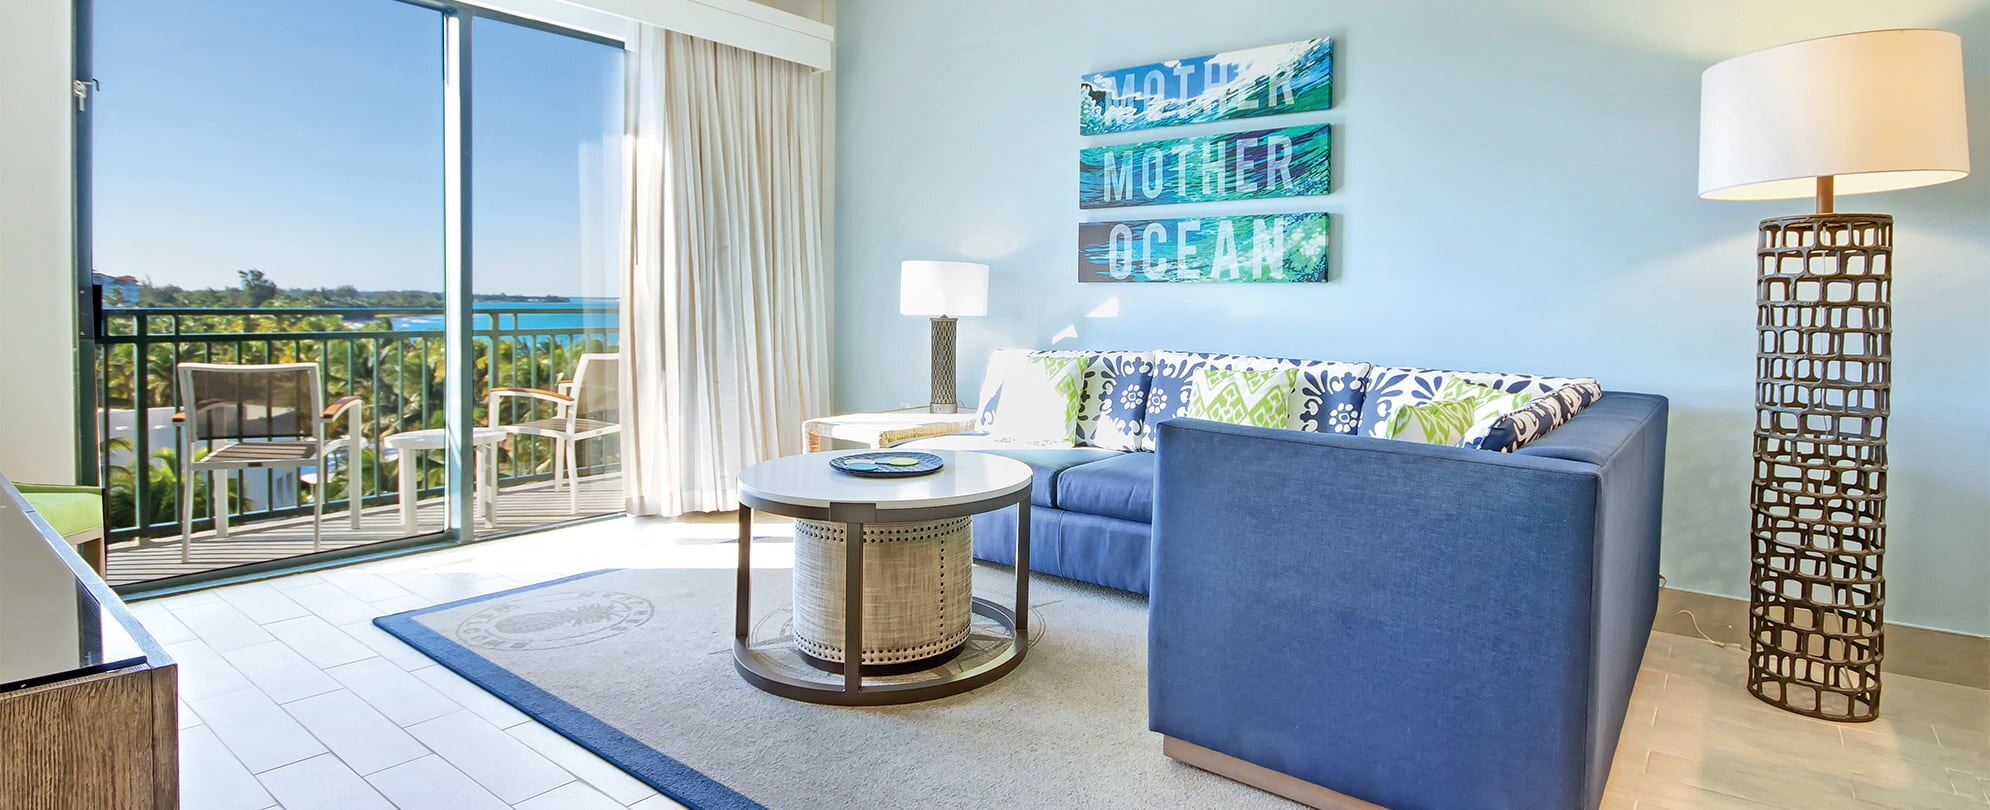 Blue sectional couch and tall lamp in the living room of a Margaritaville Vacation Club by Wyndham - Rio Mar suite.